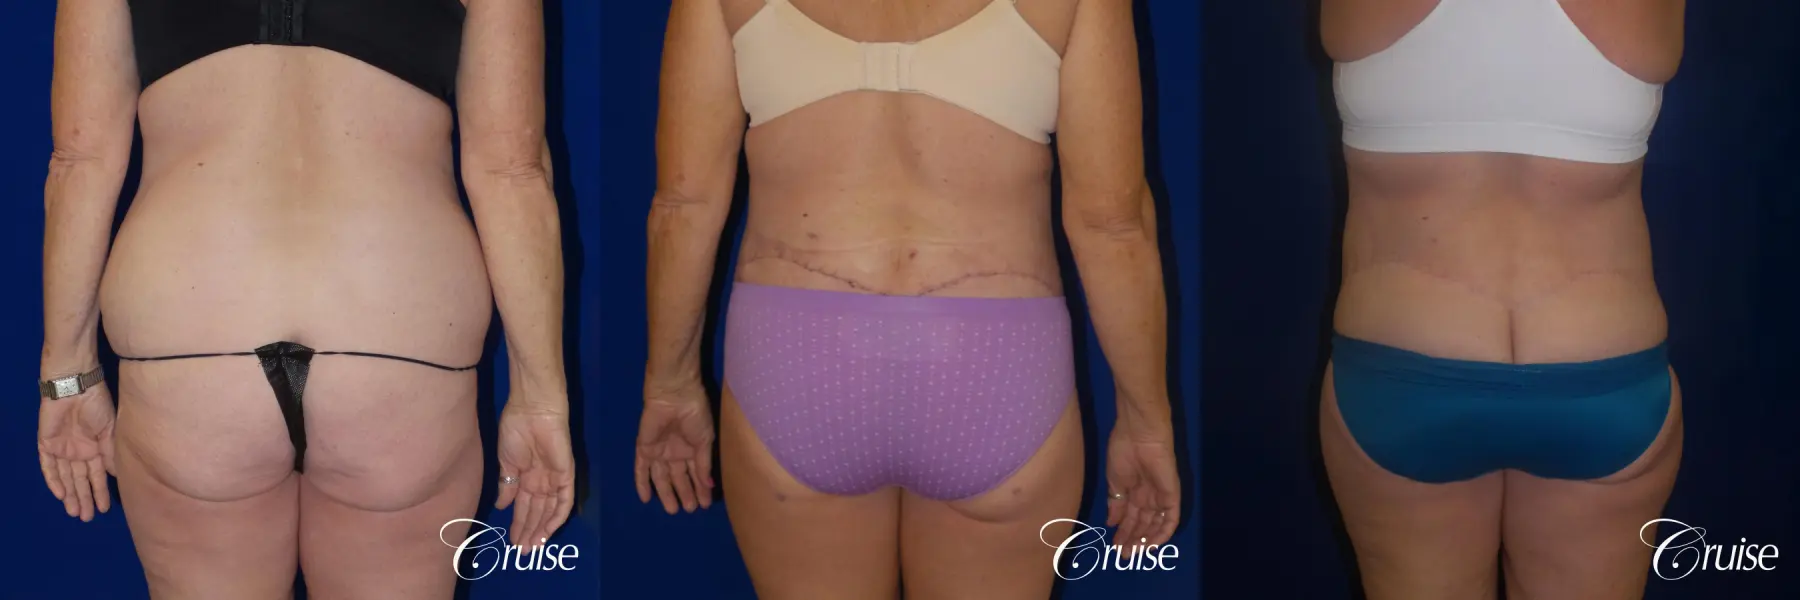 Before and After a Tummy Tuck